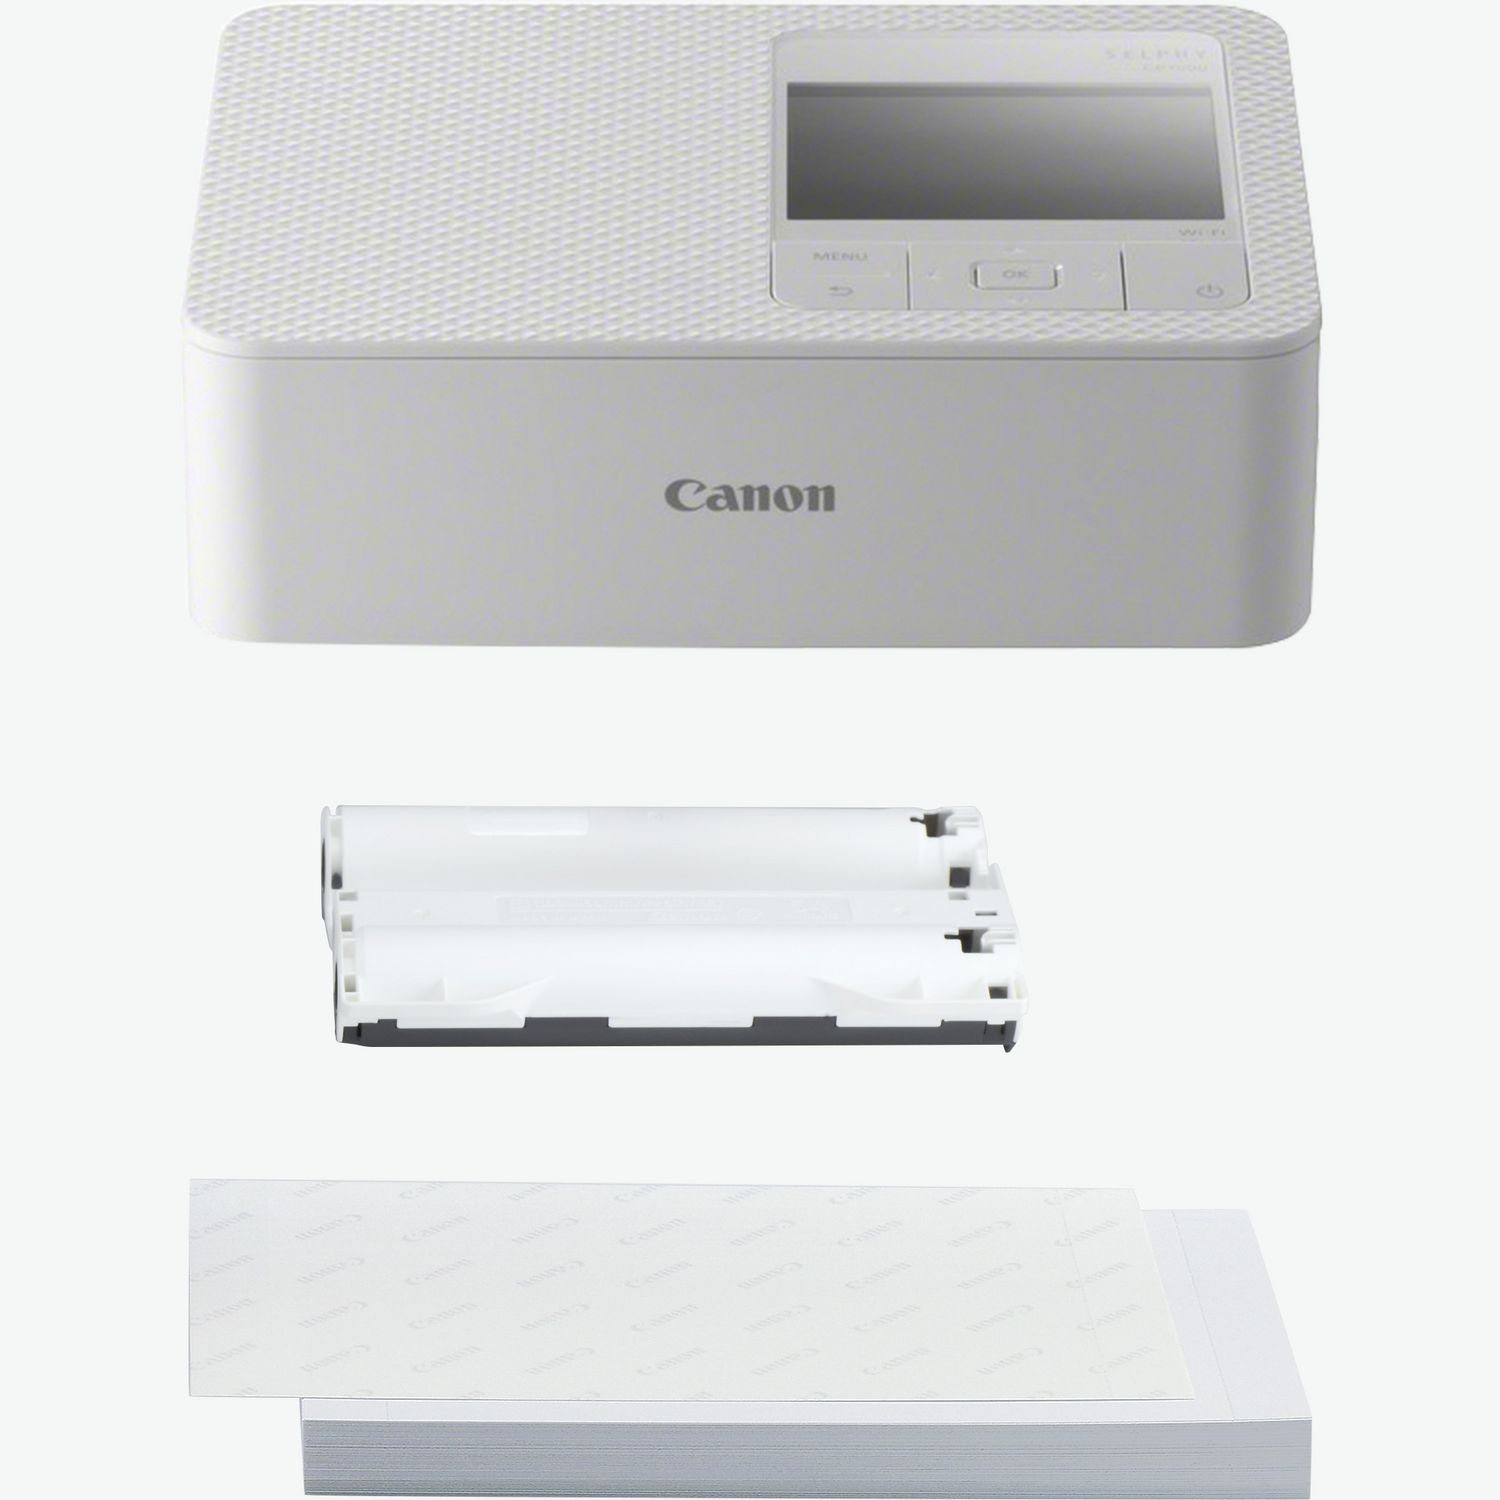 PIXMA MG3650S Ink/ Toner cartridges & Paper — Canon Norge Store